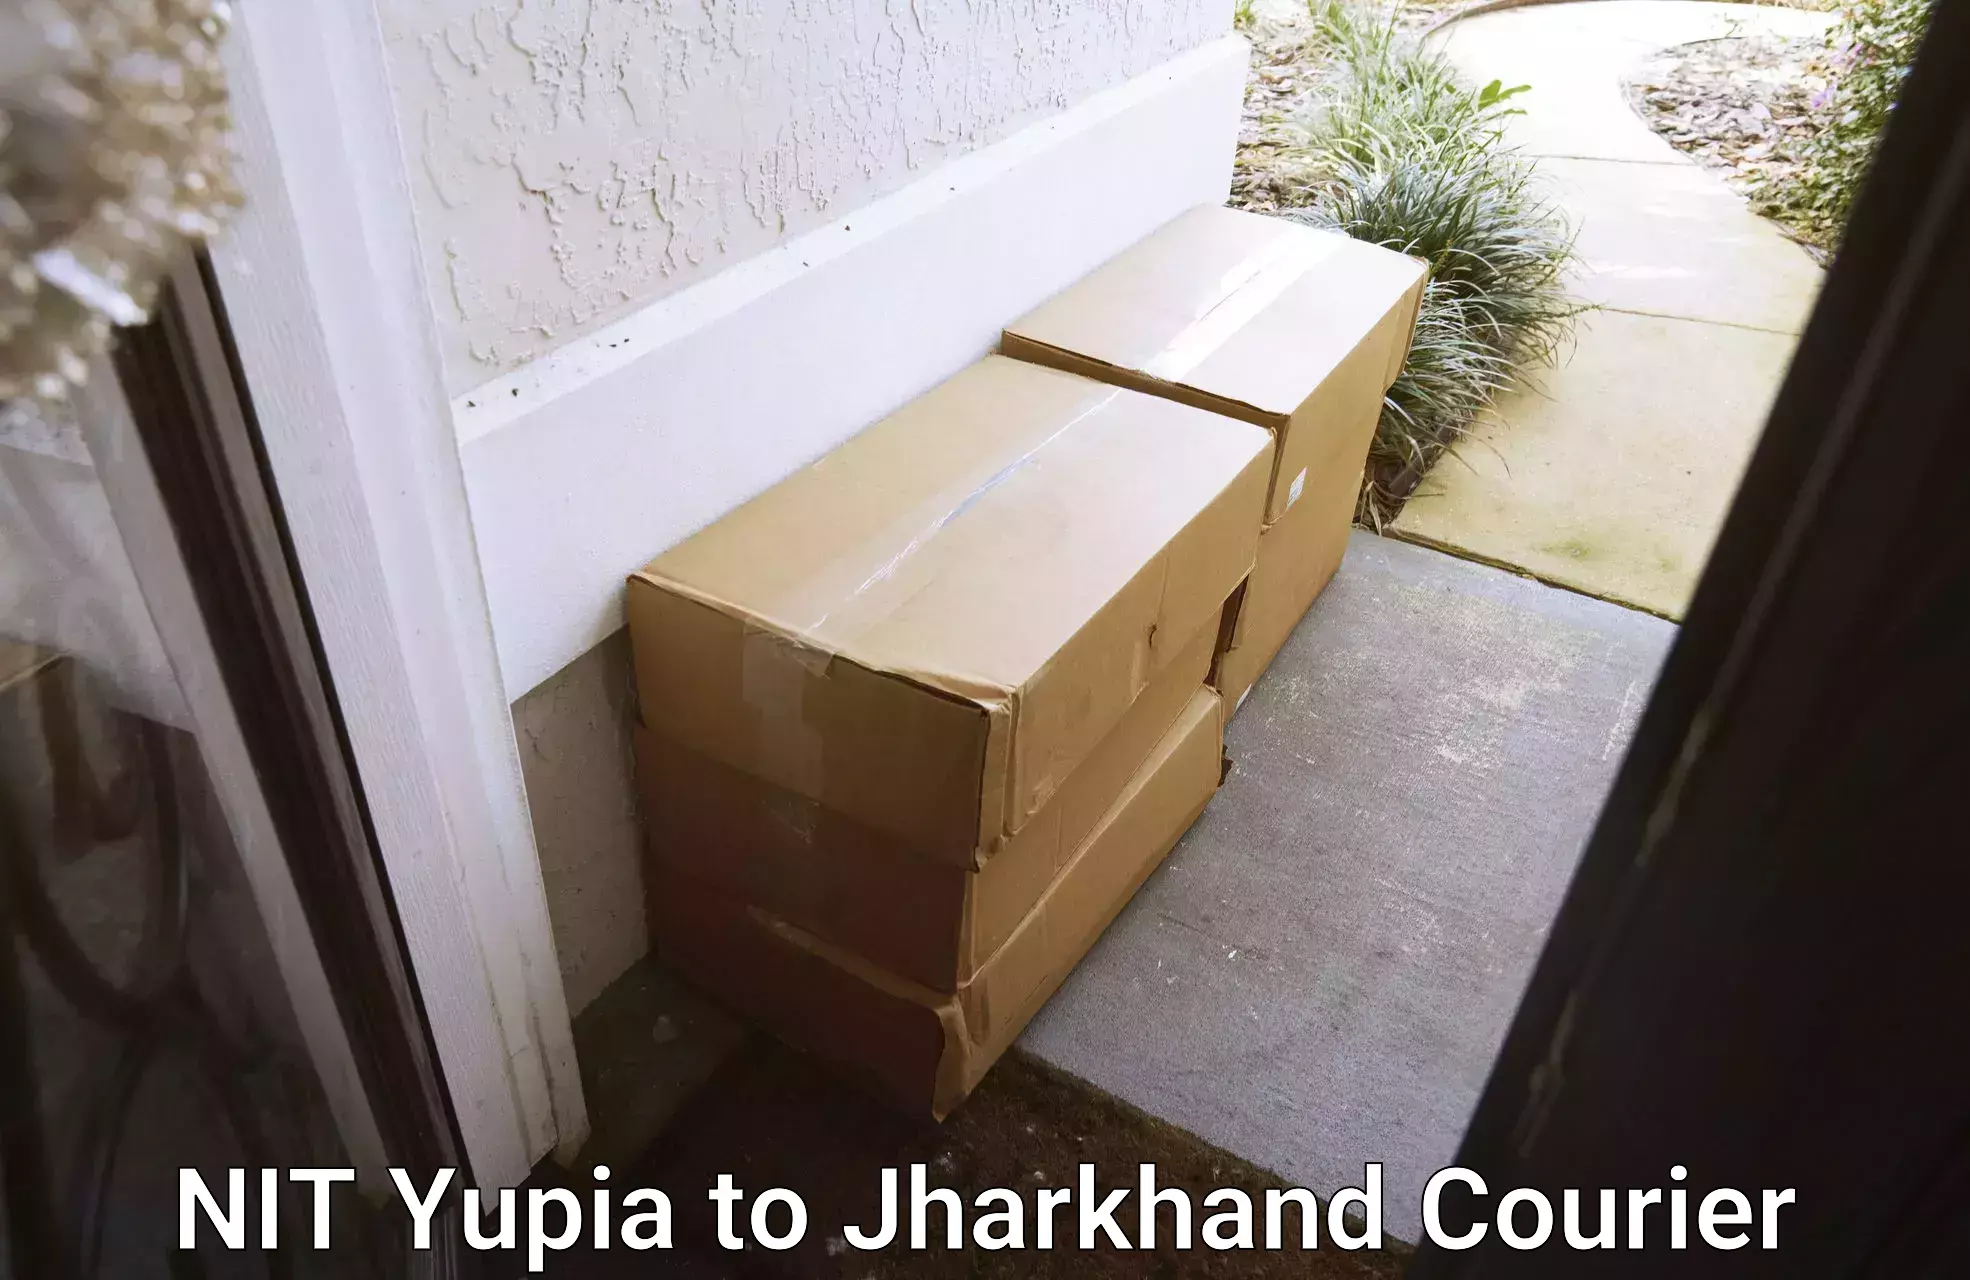 Express courier capabilities in NIT Yupia to Jharkhand